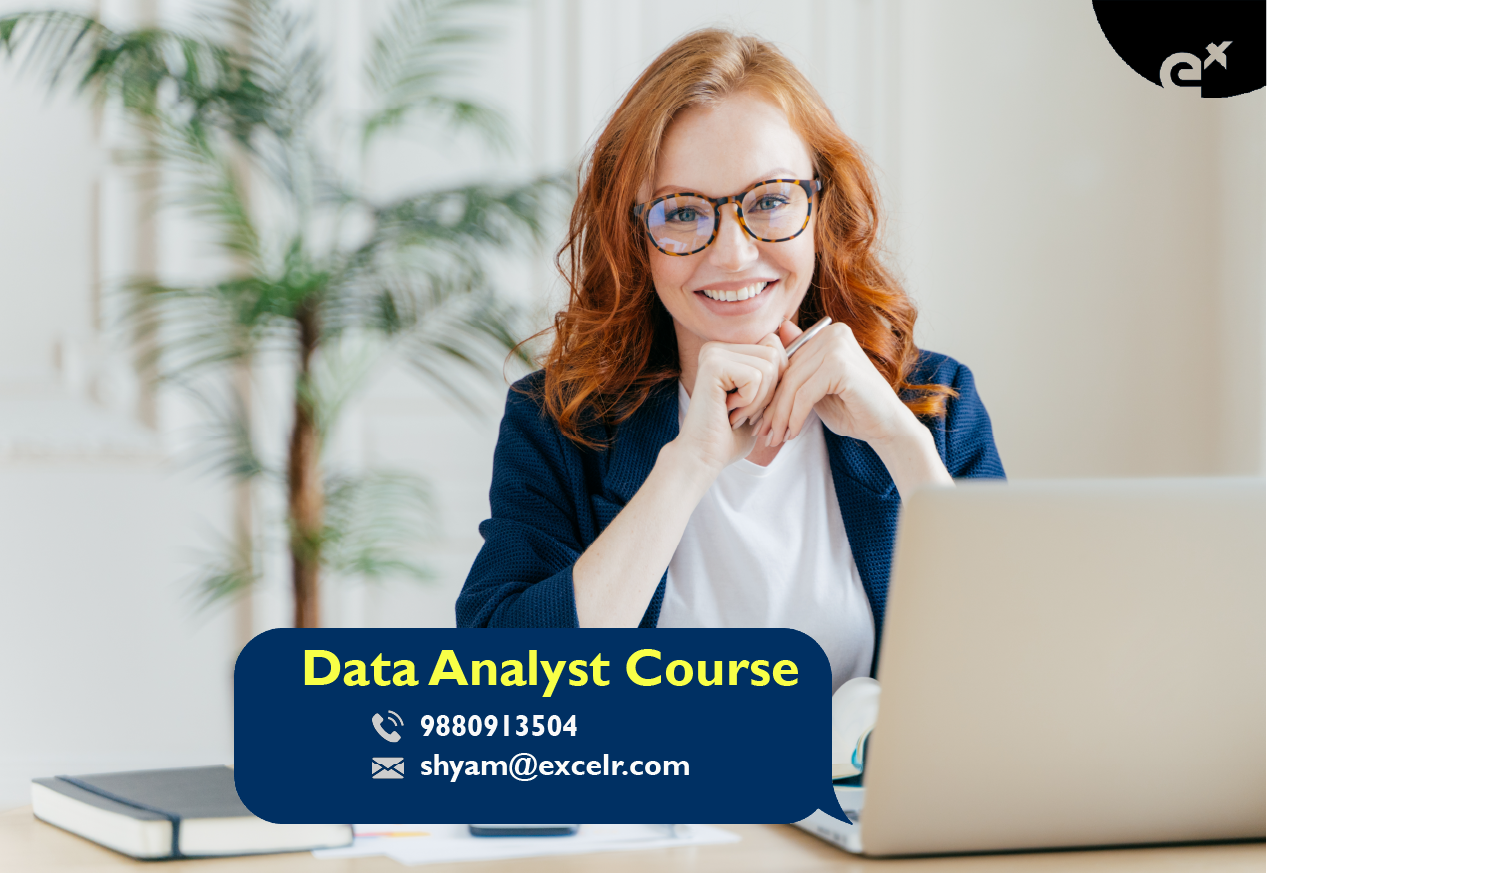 ExcelR-Data Analyst Course In Pune, Pune, Maharashtra, India